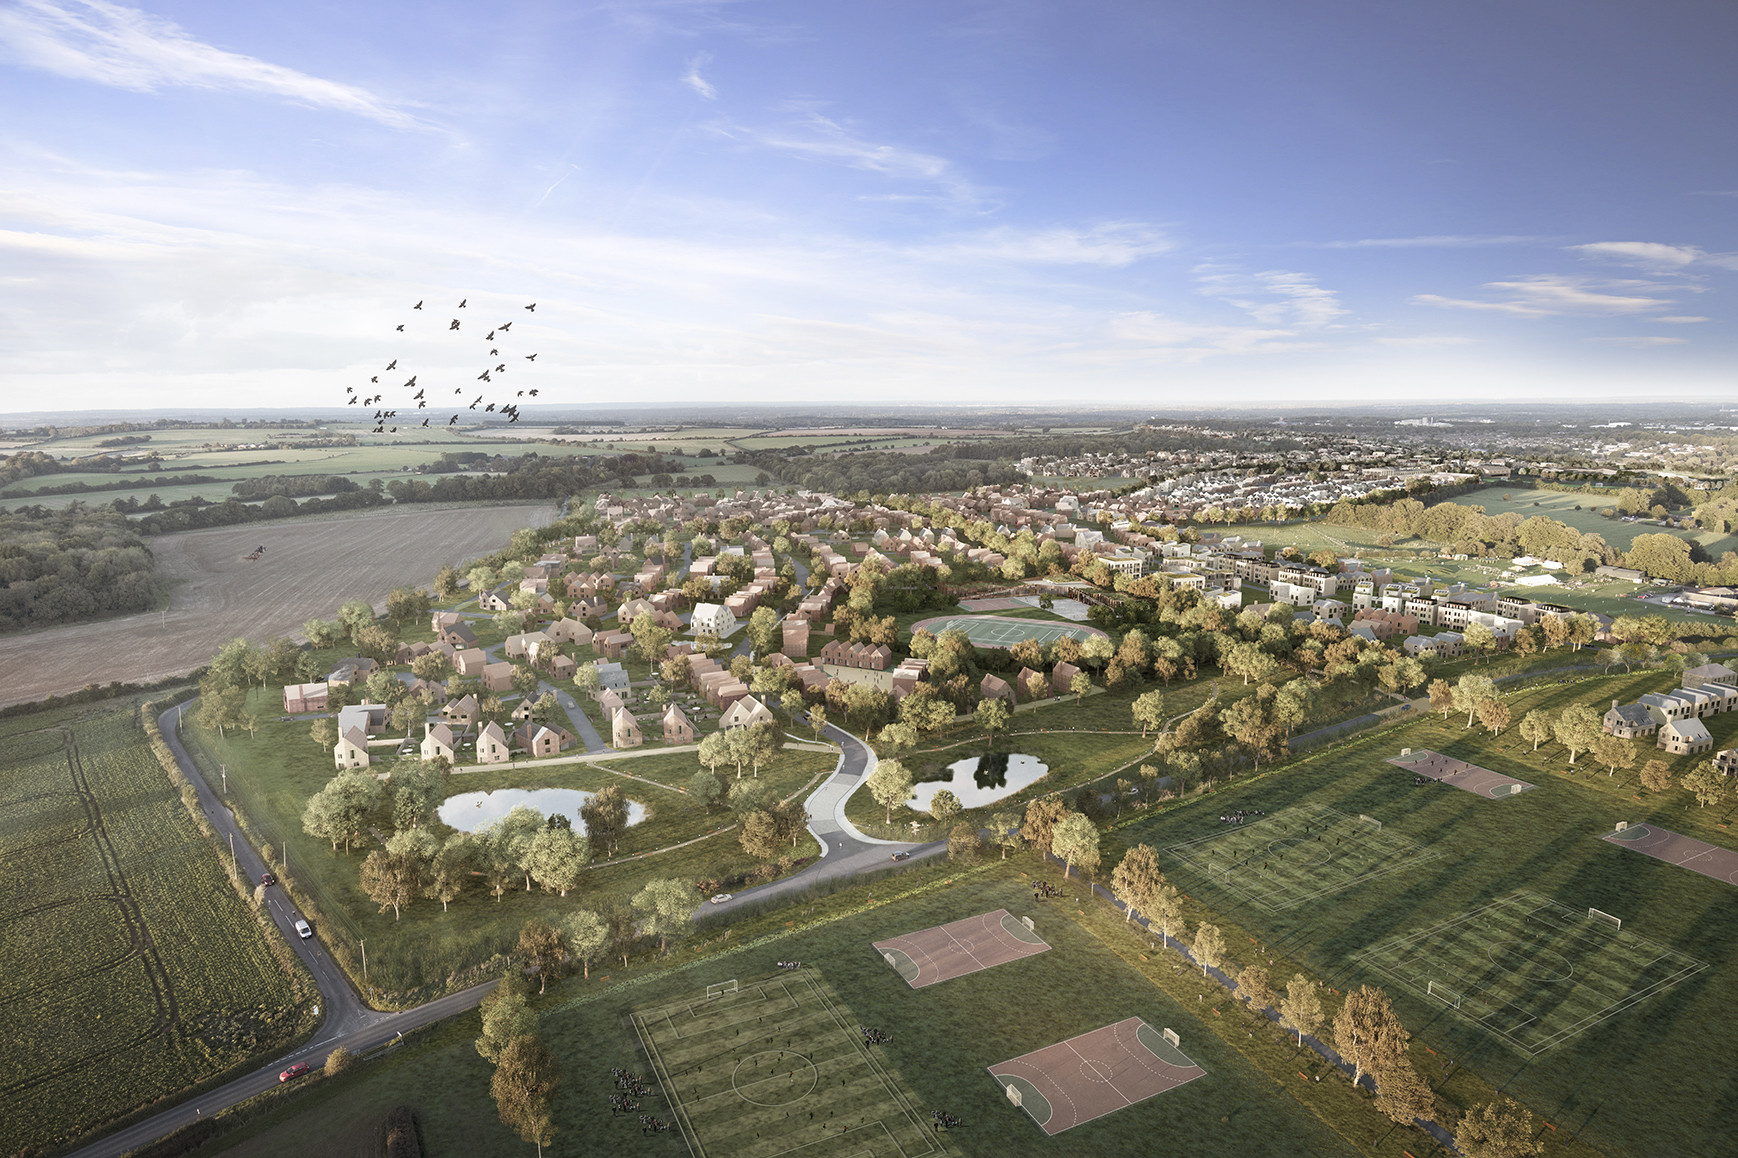 Manydown secures planning permission for 3500 dwellings